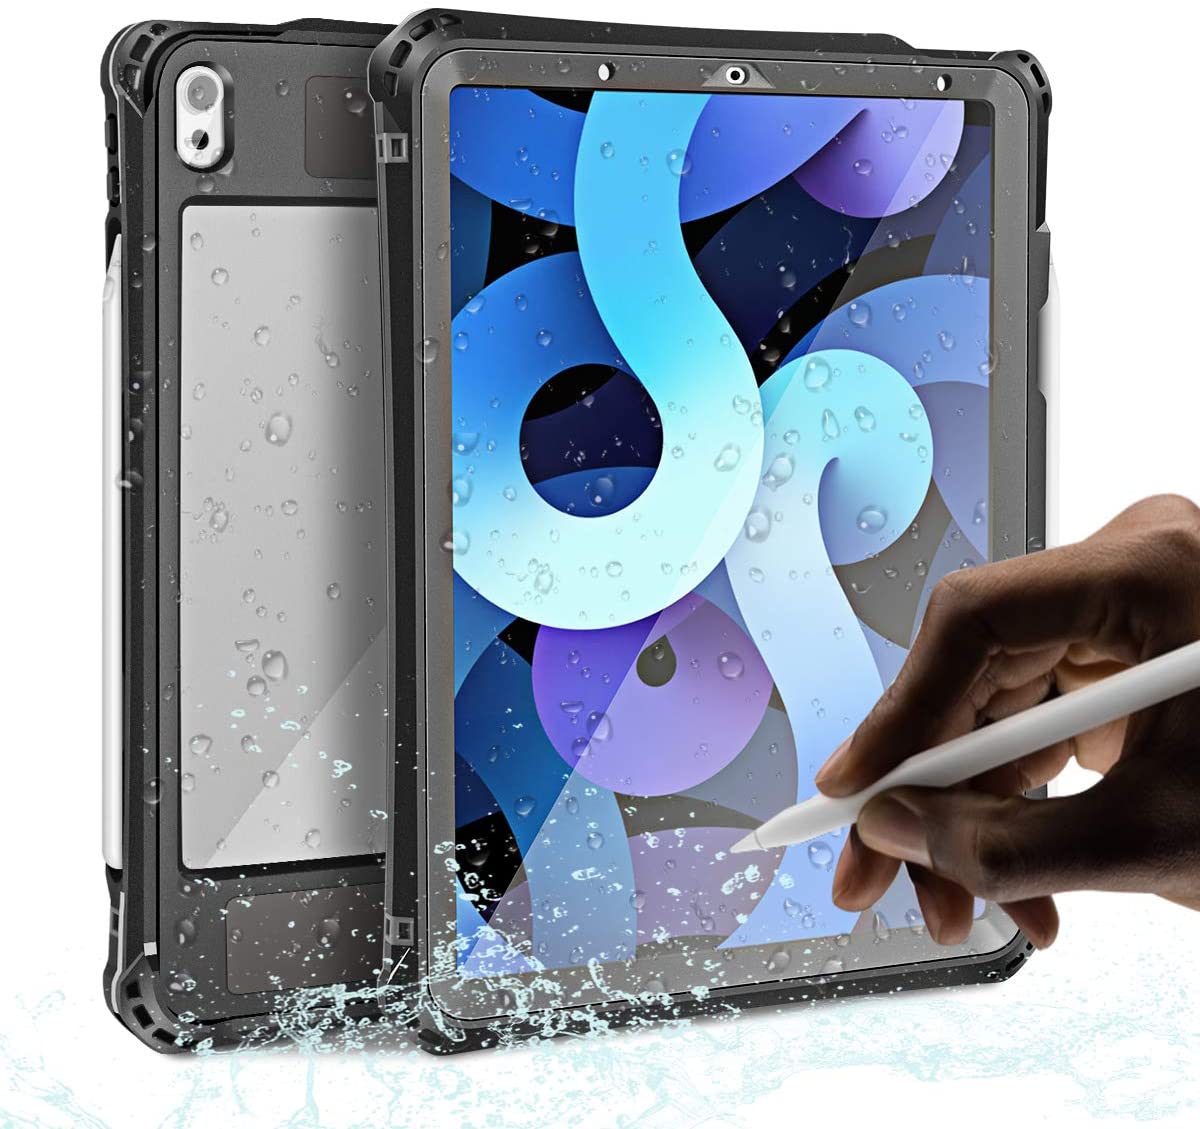 iPad Air 4th Gen 2020 10.9 inch IP68 Waterproof Case Cover with 360 Full-Body Underwater Protection and Lanyard Kickstand